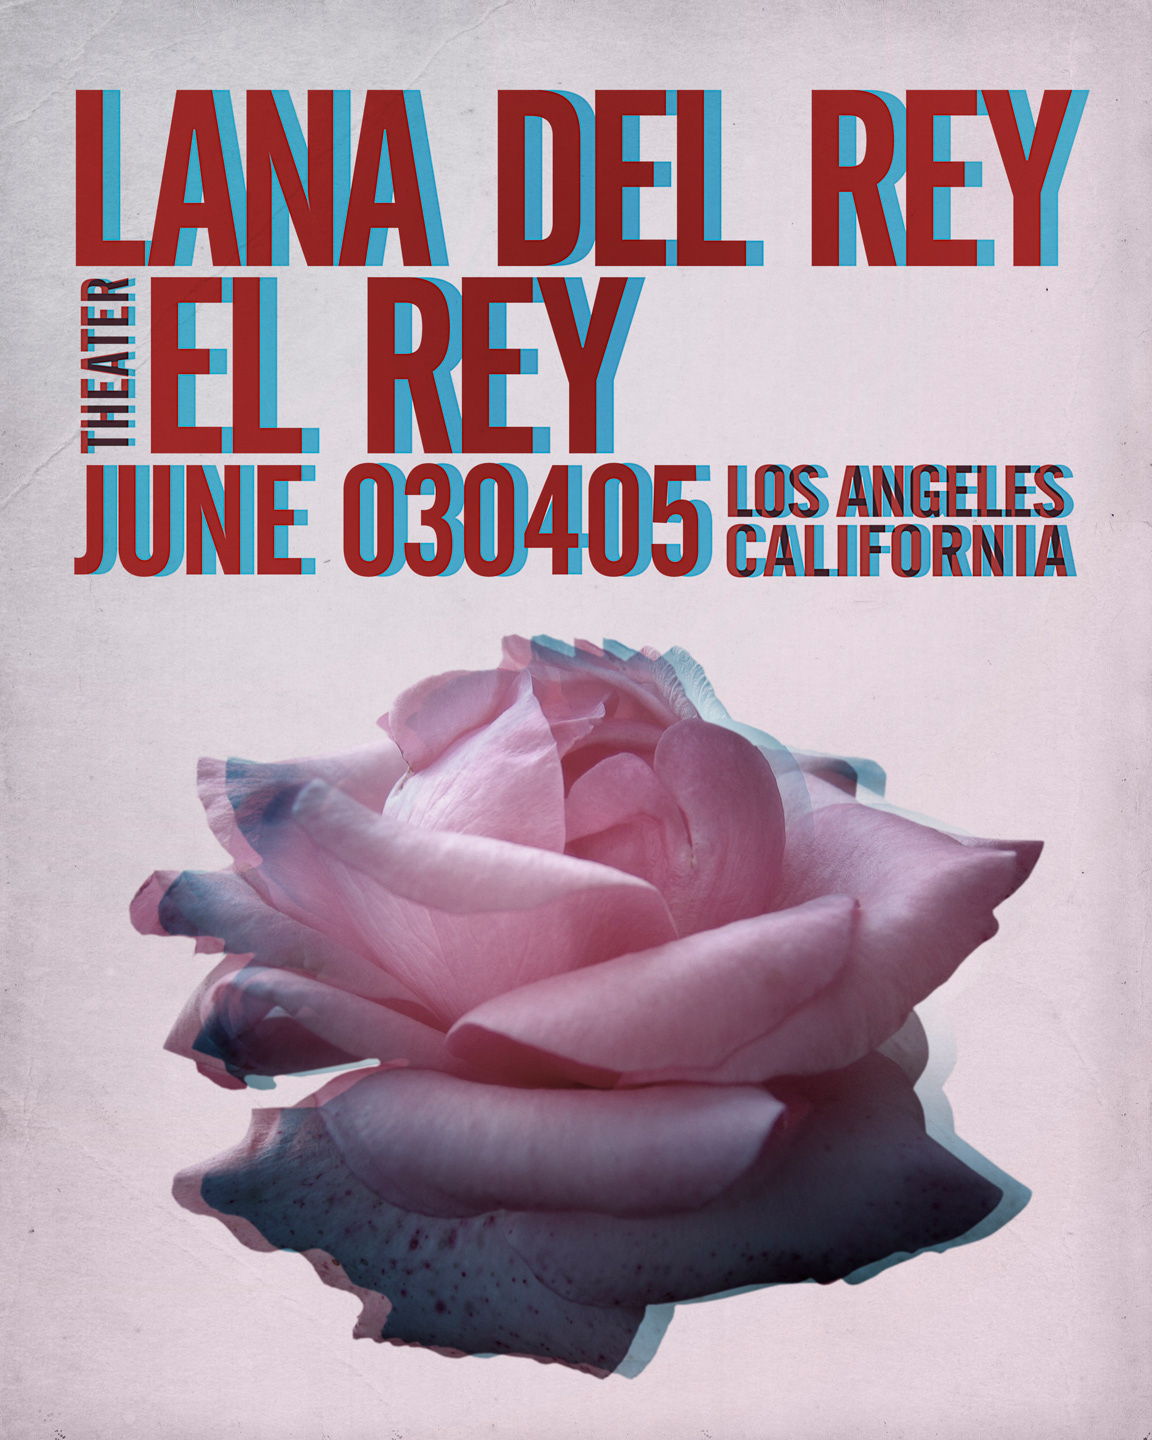 Lana Del Rey el rey theatre Los Angeles  california sad core Born to Die Video Games blue jeans Singer contest live abstract Roses Style